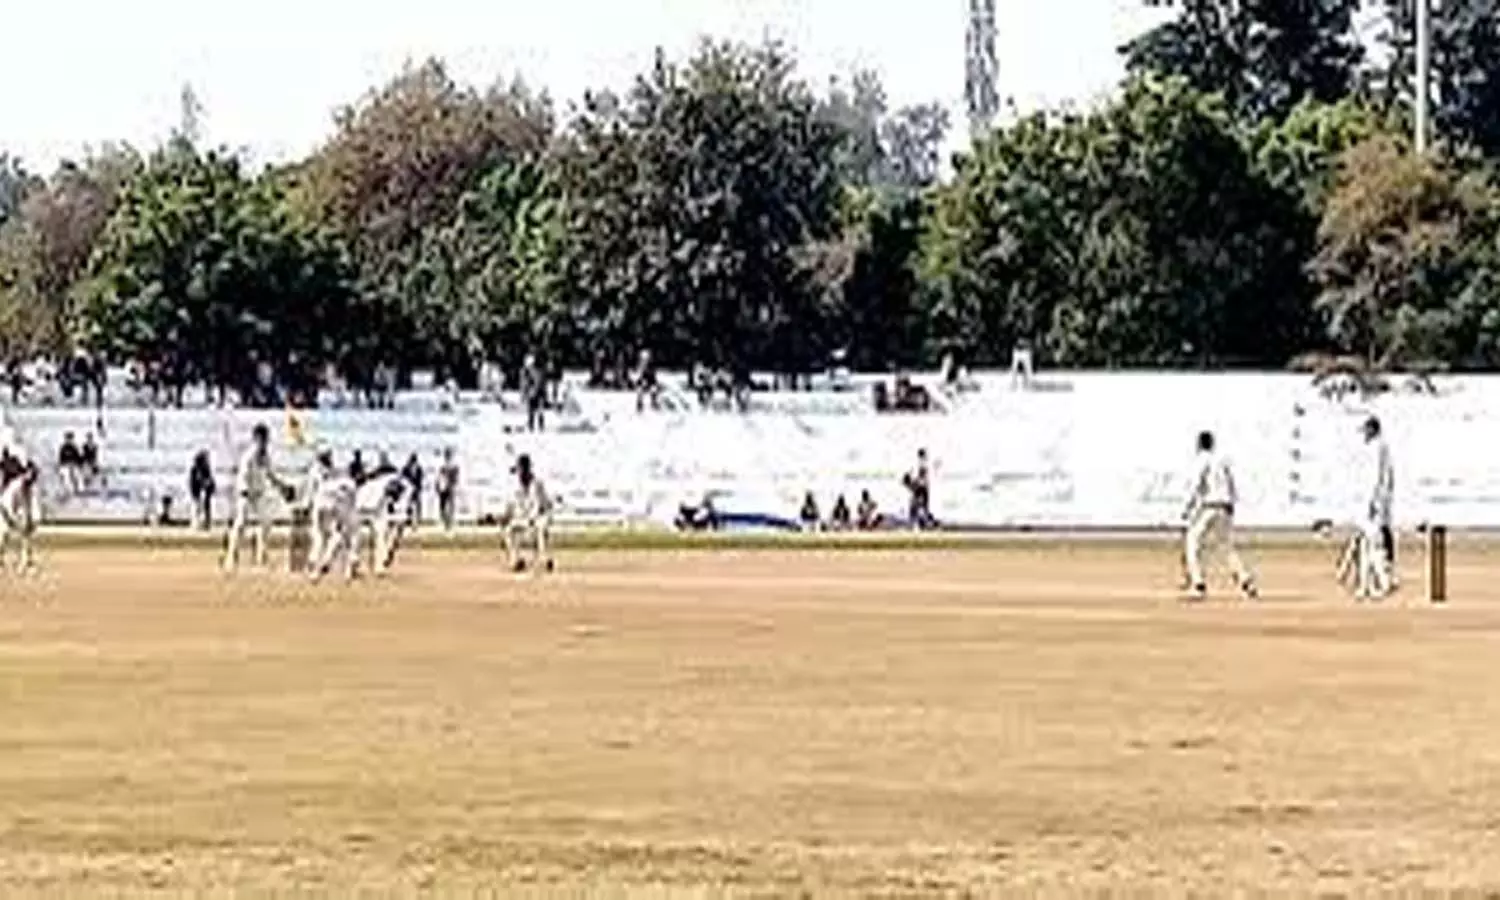 The ongoing Ranji Trophy match between Orissa and UP was drawn in Meerut